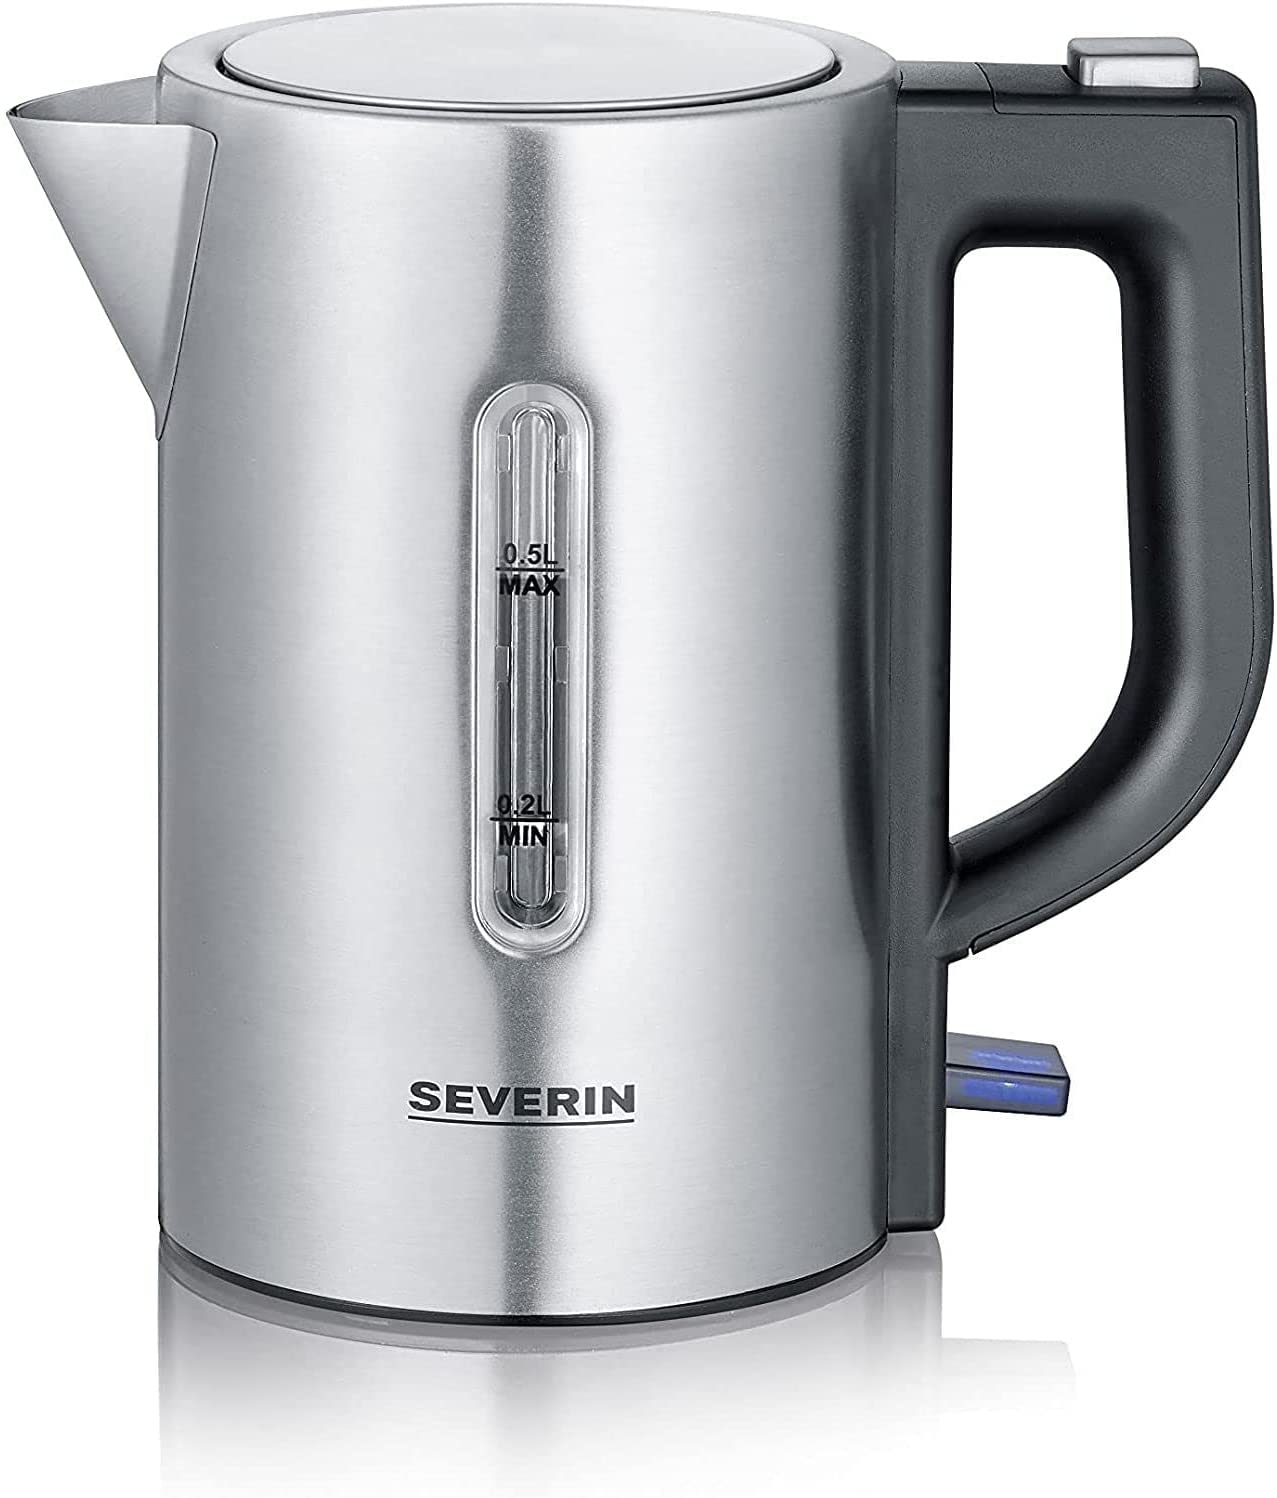 SEVERIN Travel Kettle Set, Mini Travel Kettle for 0.5L Electric Kettle with 2 Plastic Cups & 2 Spoons, Brushed Stainless Steel/Black, WK 3647